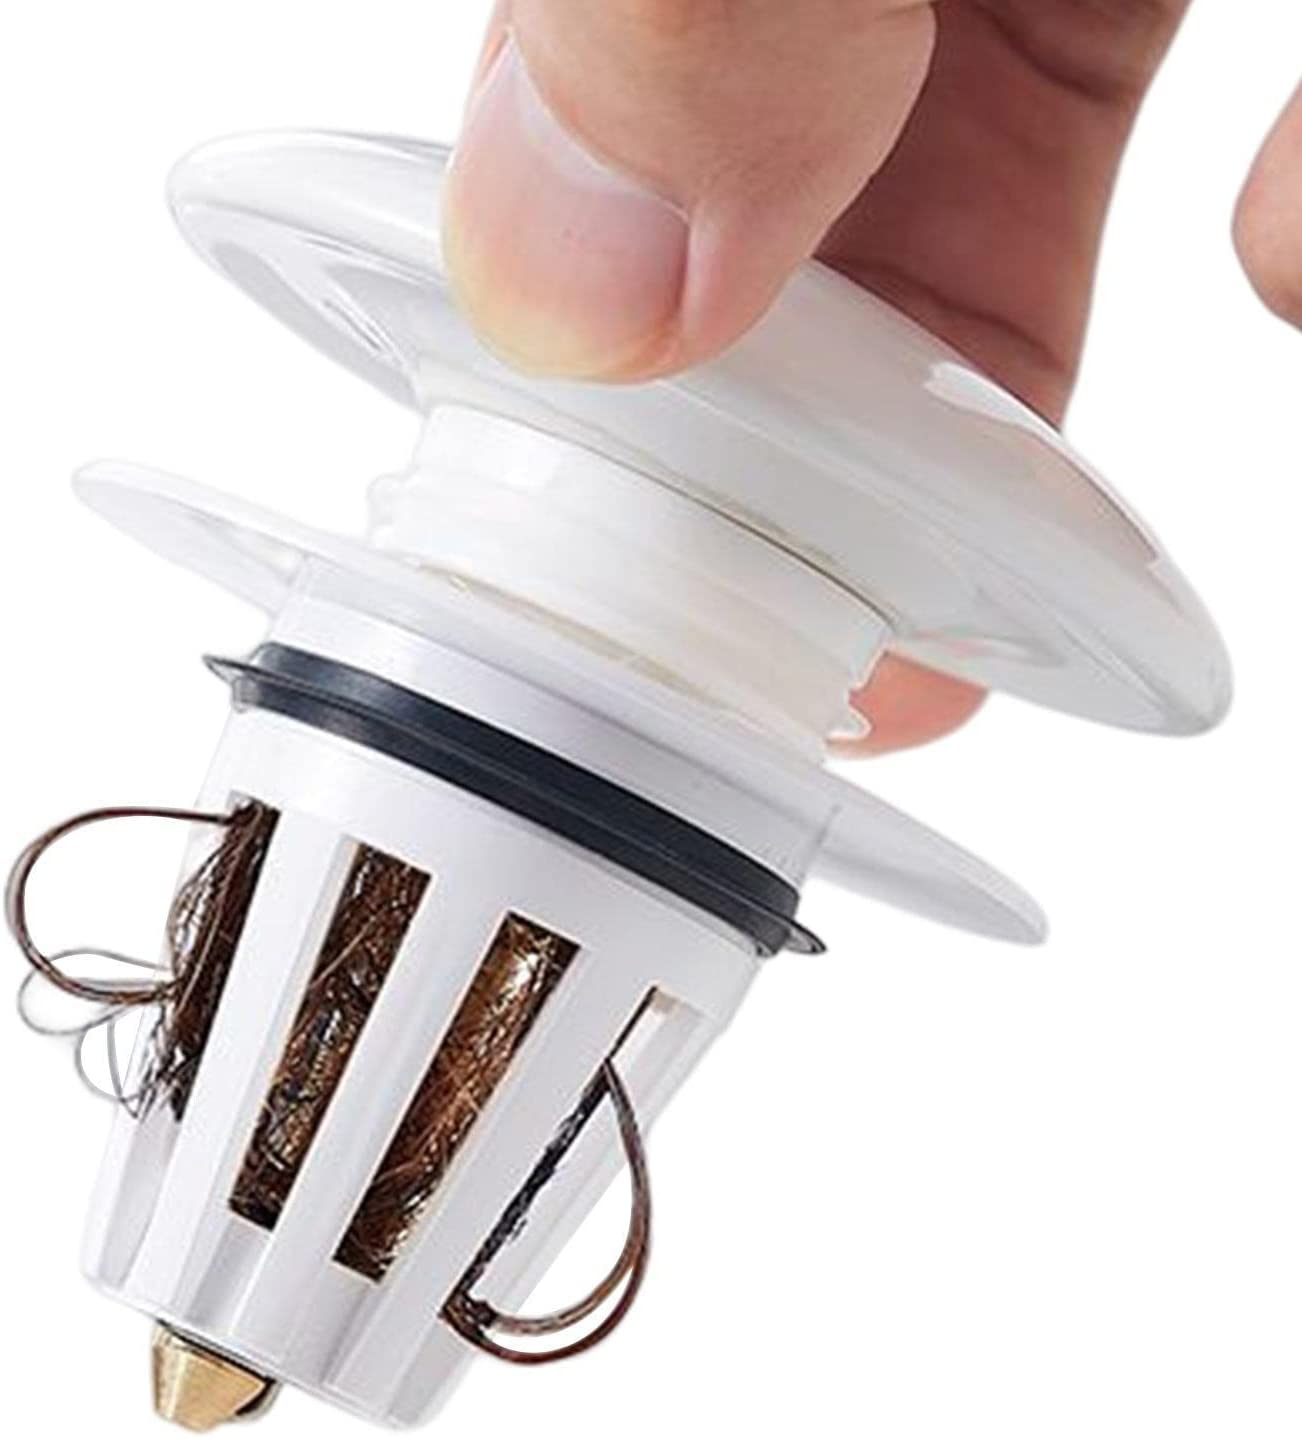 Close-up view of a Bathroom Sink Stopper Drain Filter with Hair Catcher